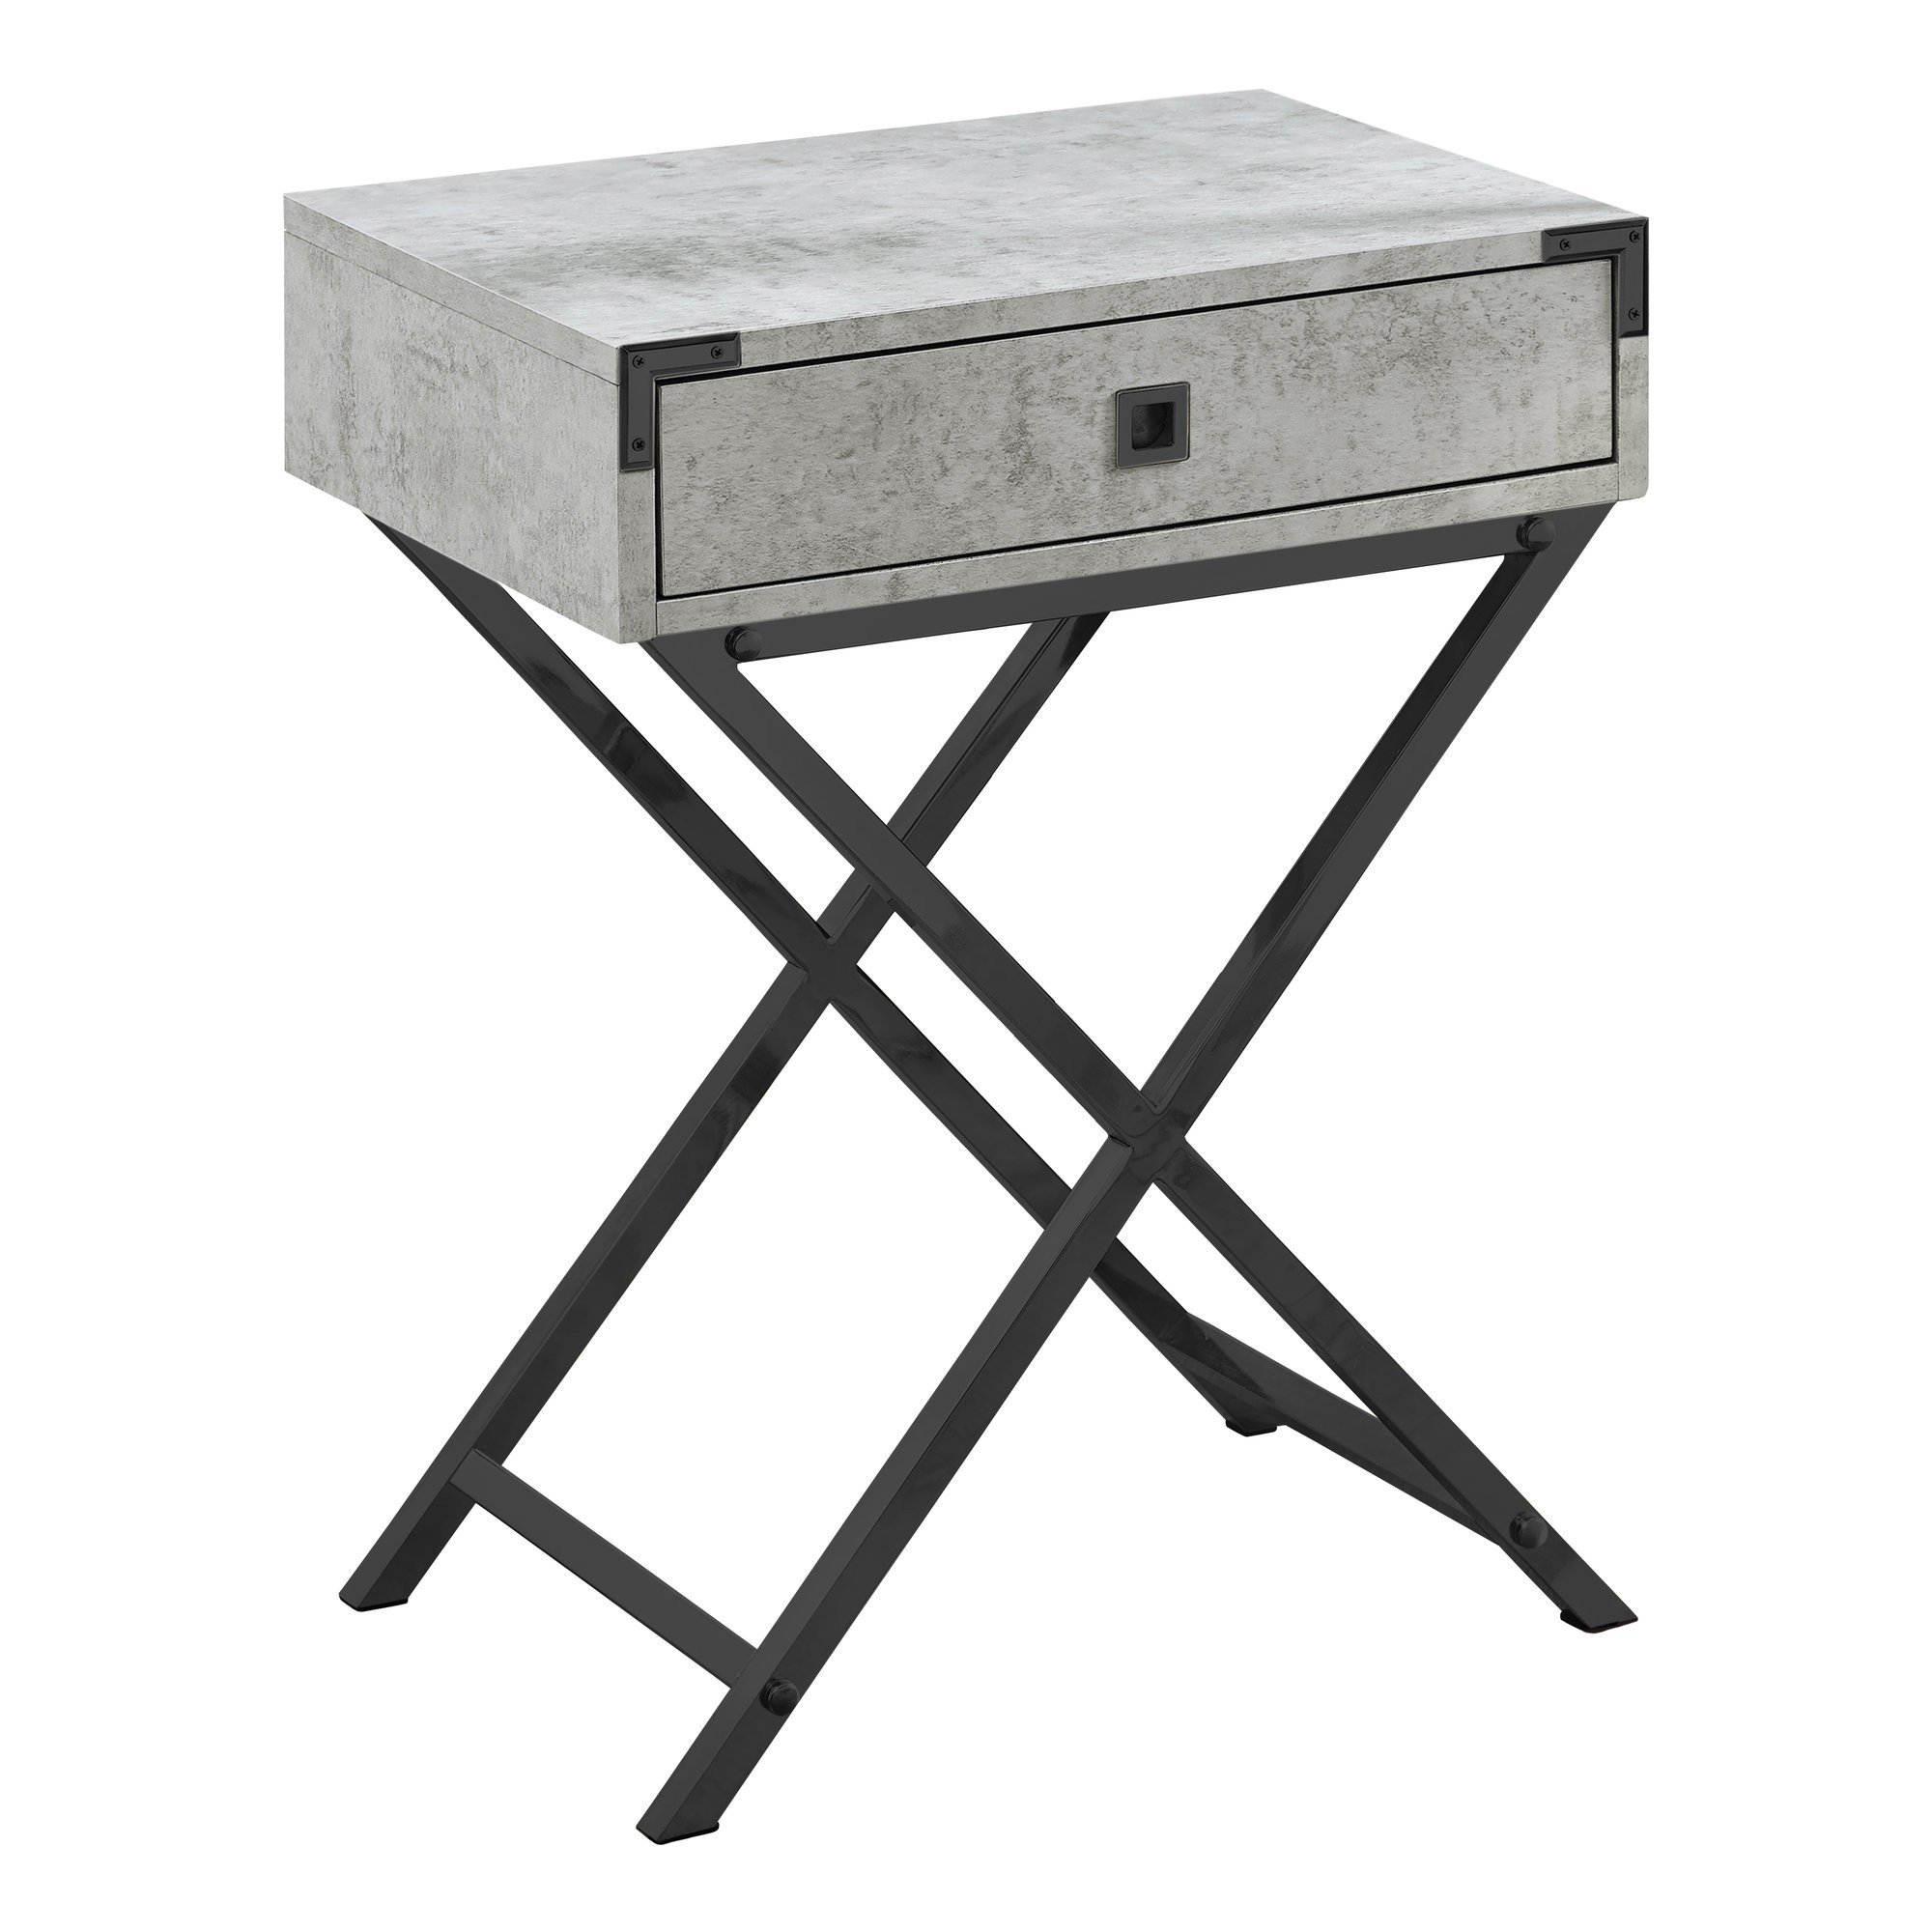 ACCENT TABLE - 24"H  / GREY CEMENT / BLACK NICKEL METAL